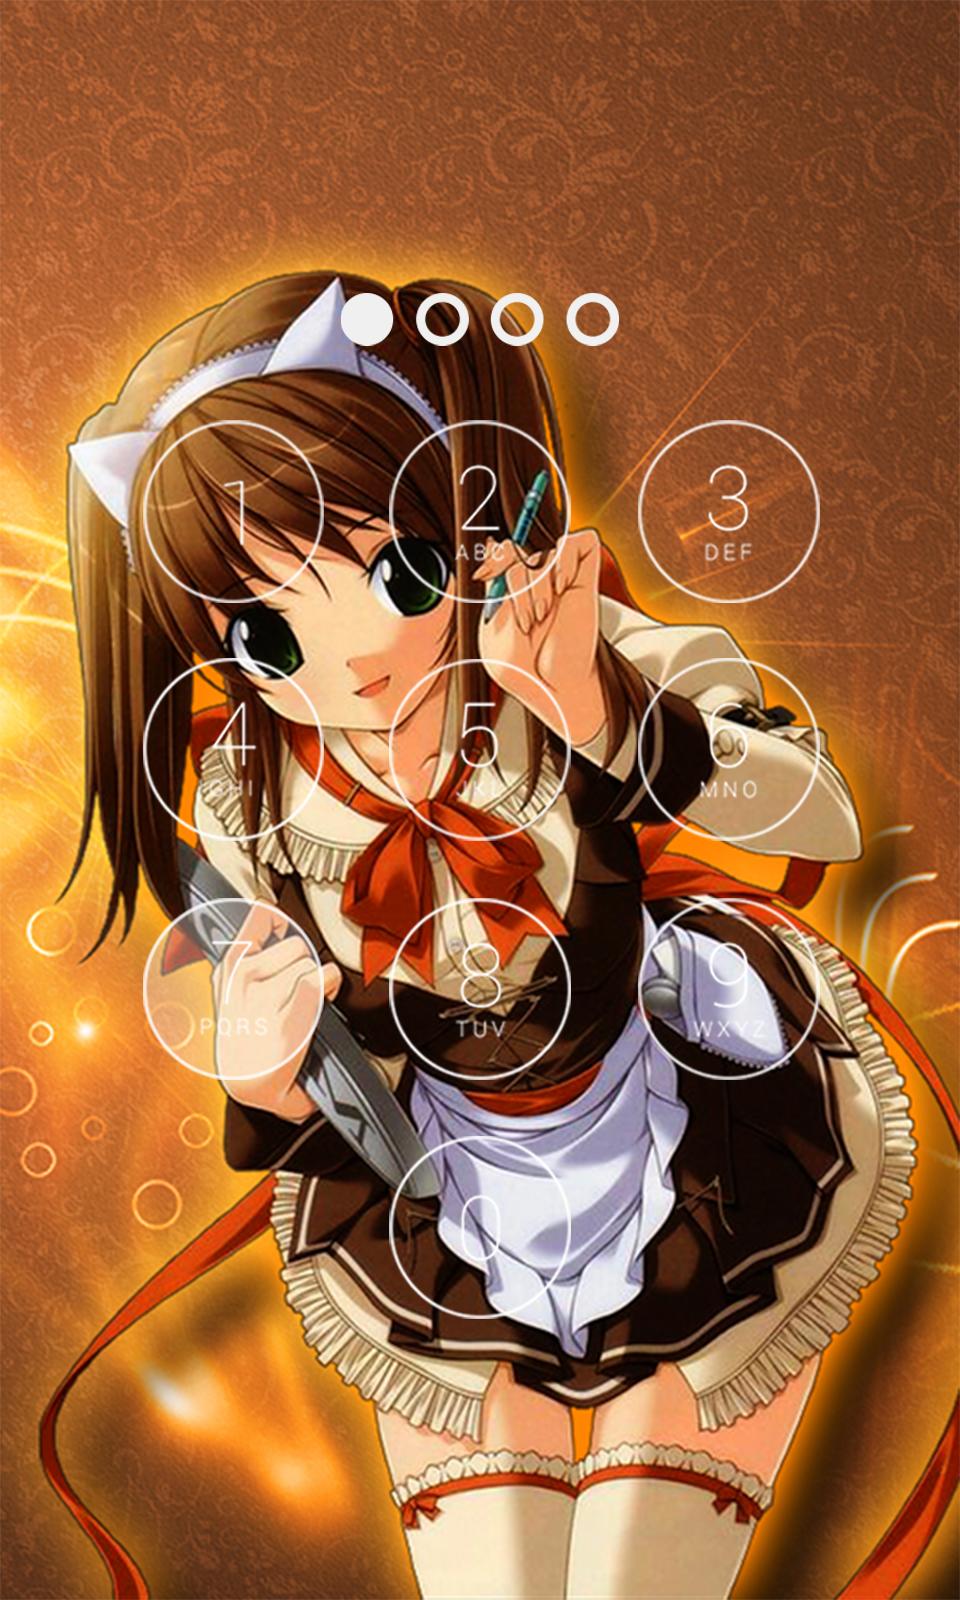 Anime Lock Screen for Android - APK Download